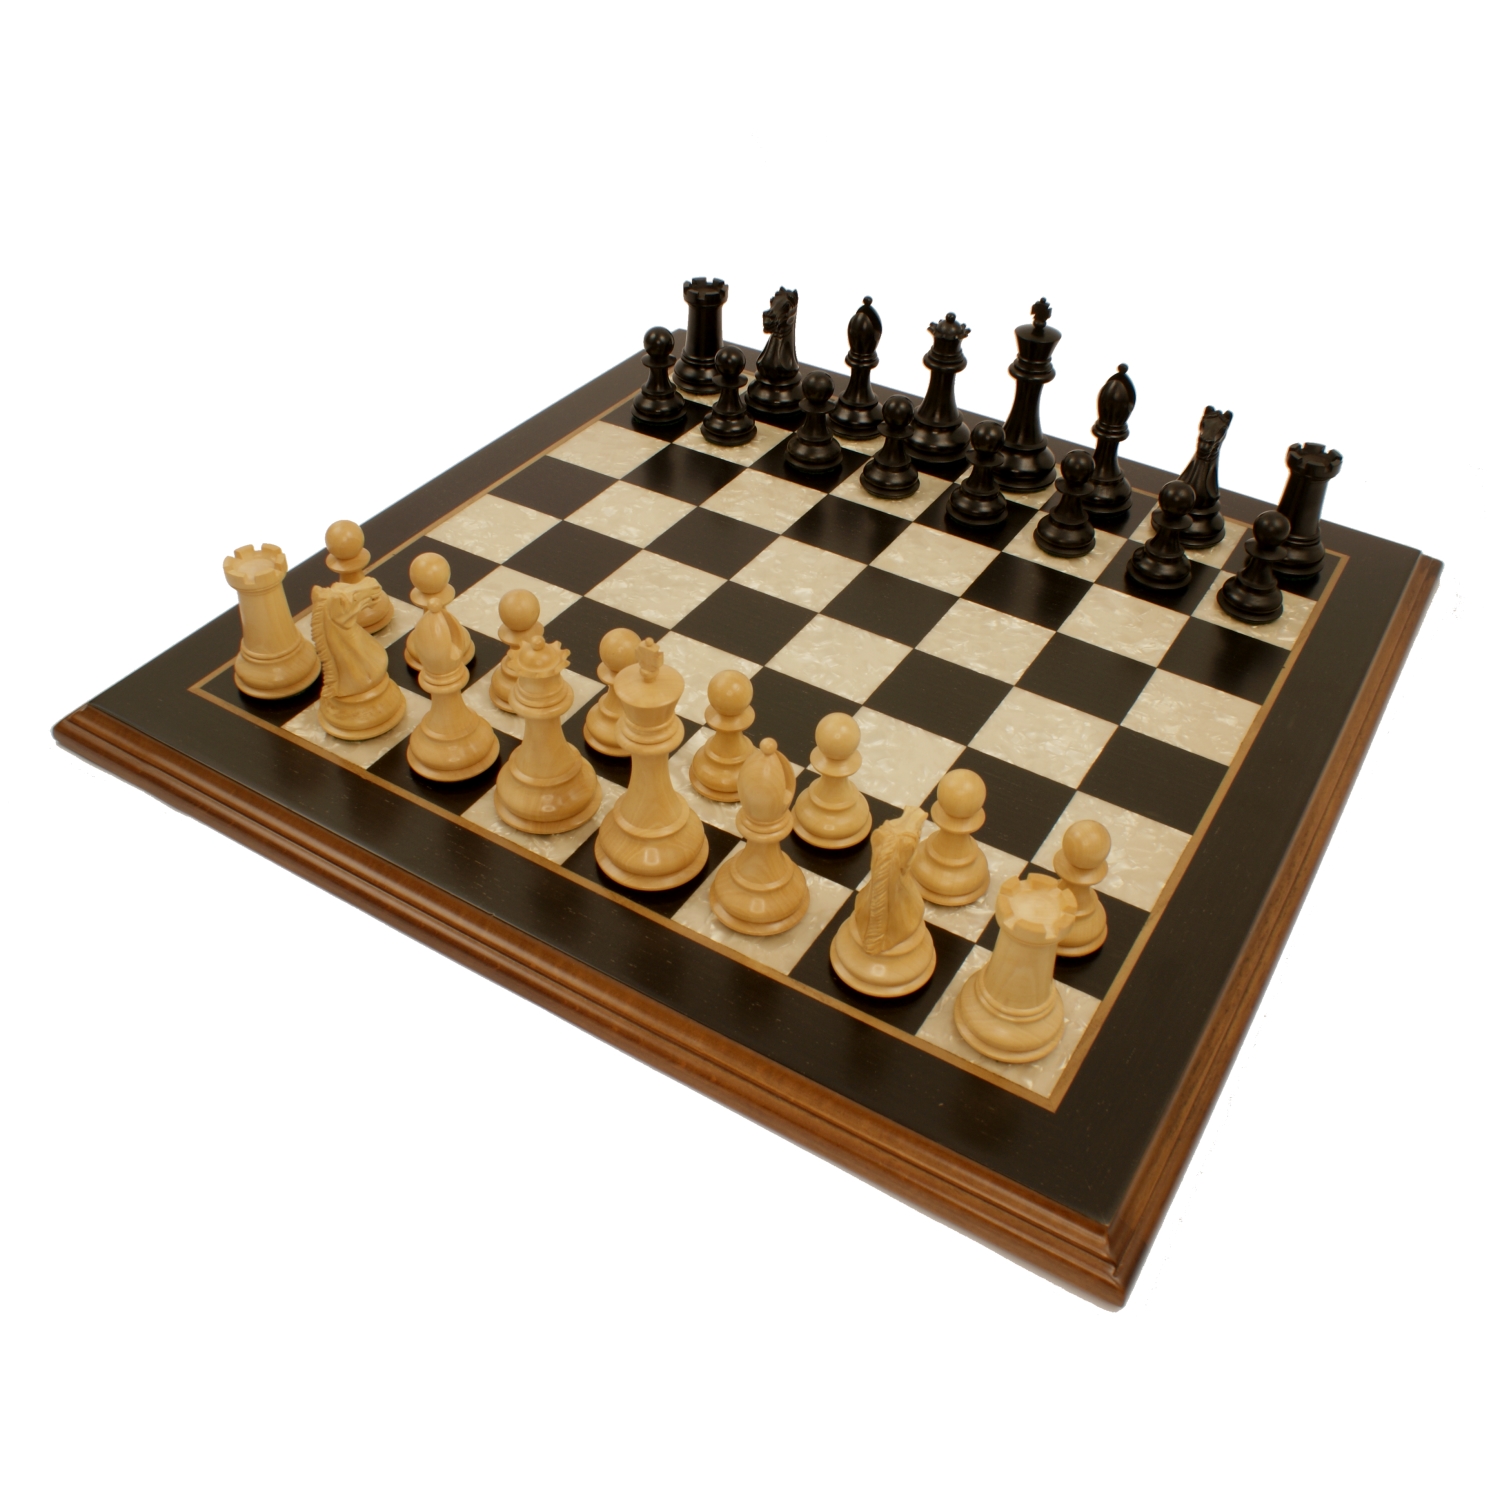 Classic Wooden Tournament chess set on black background